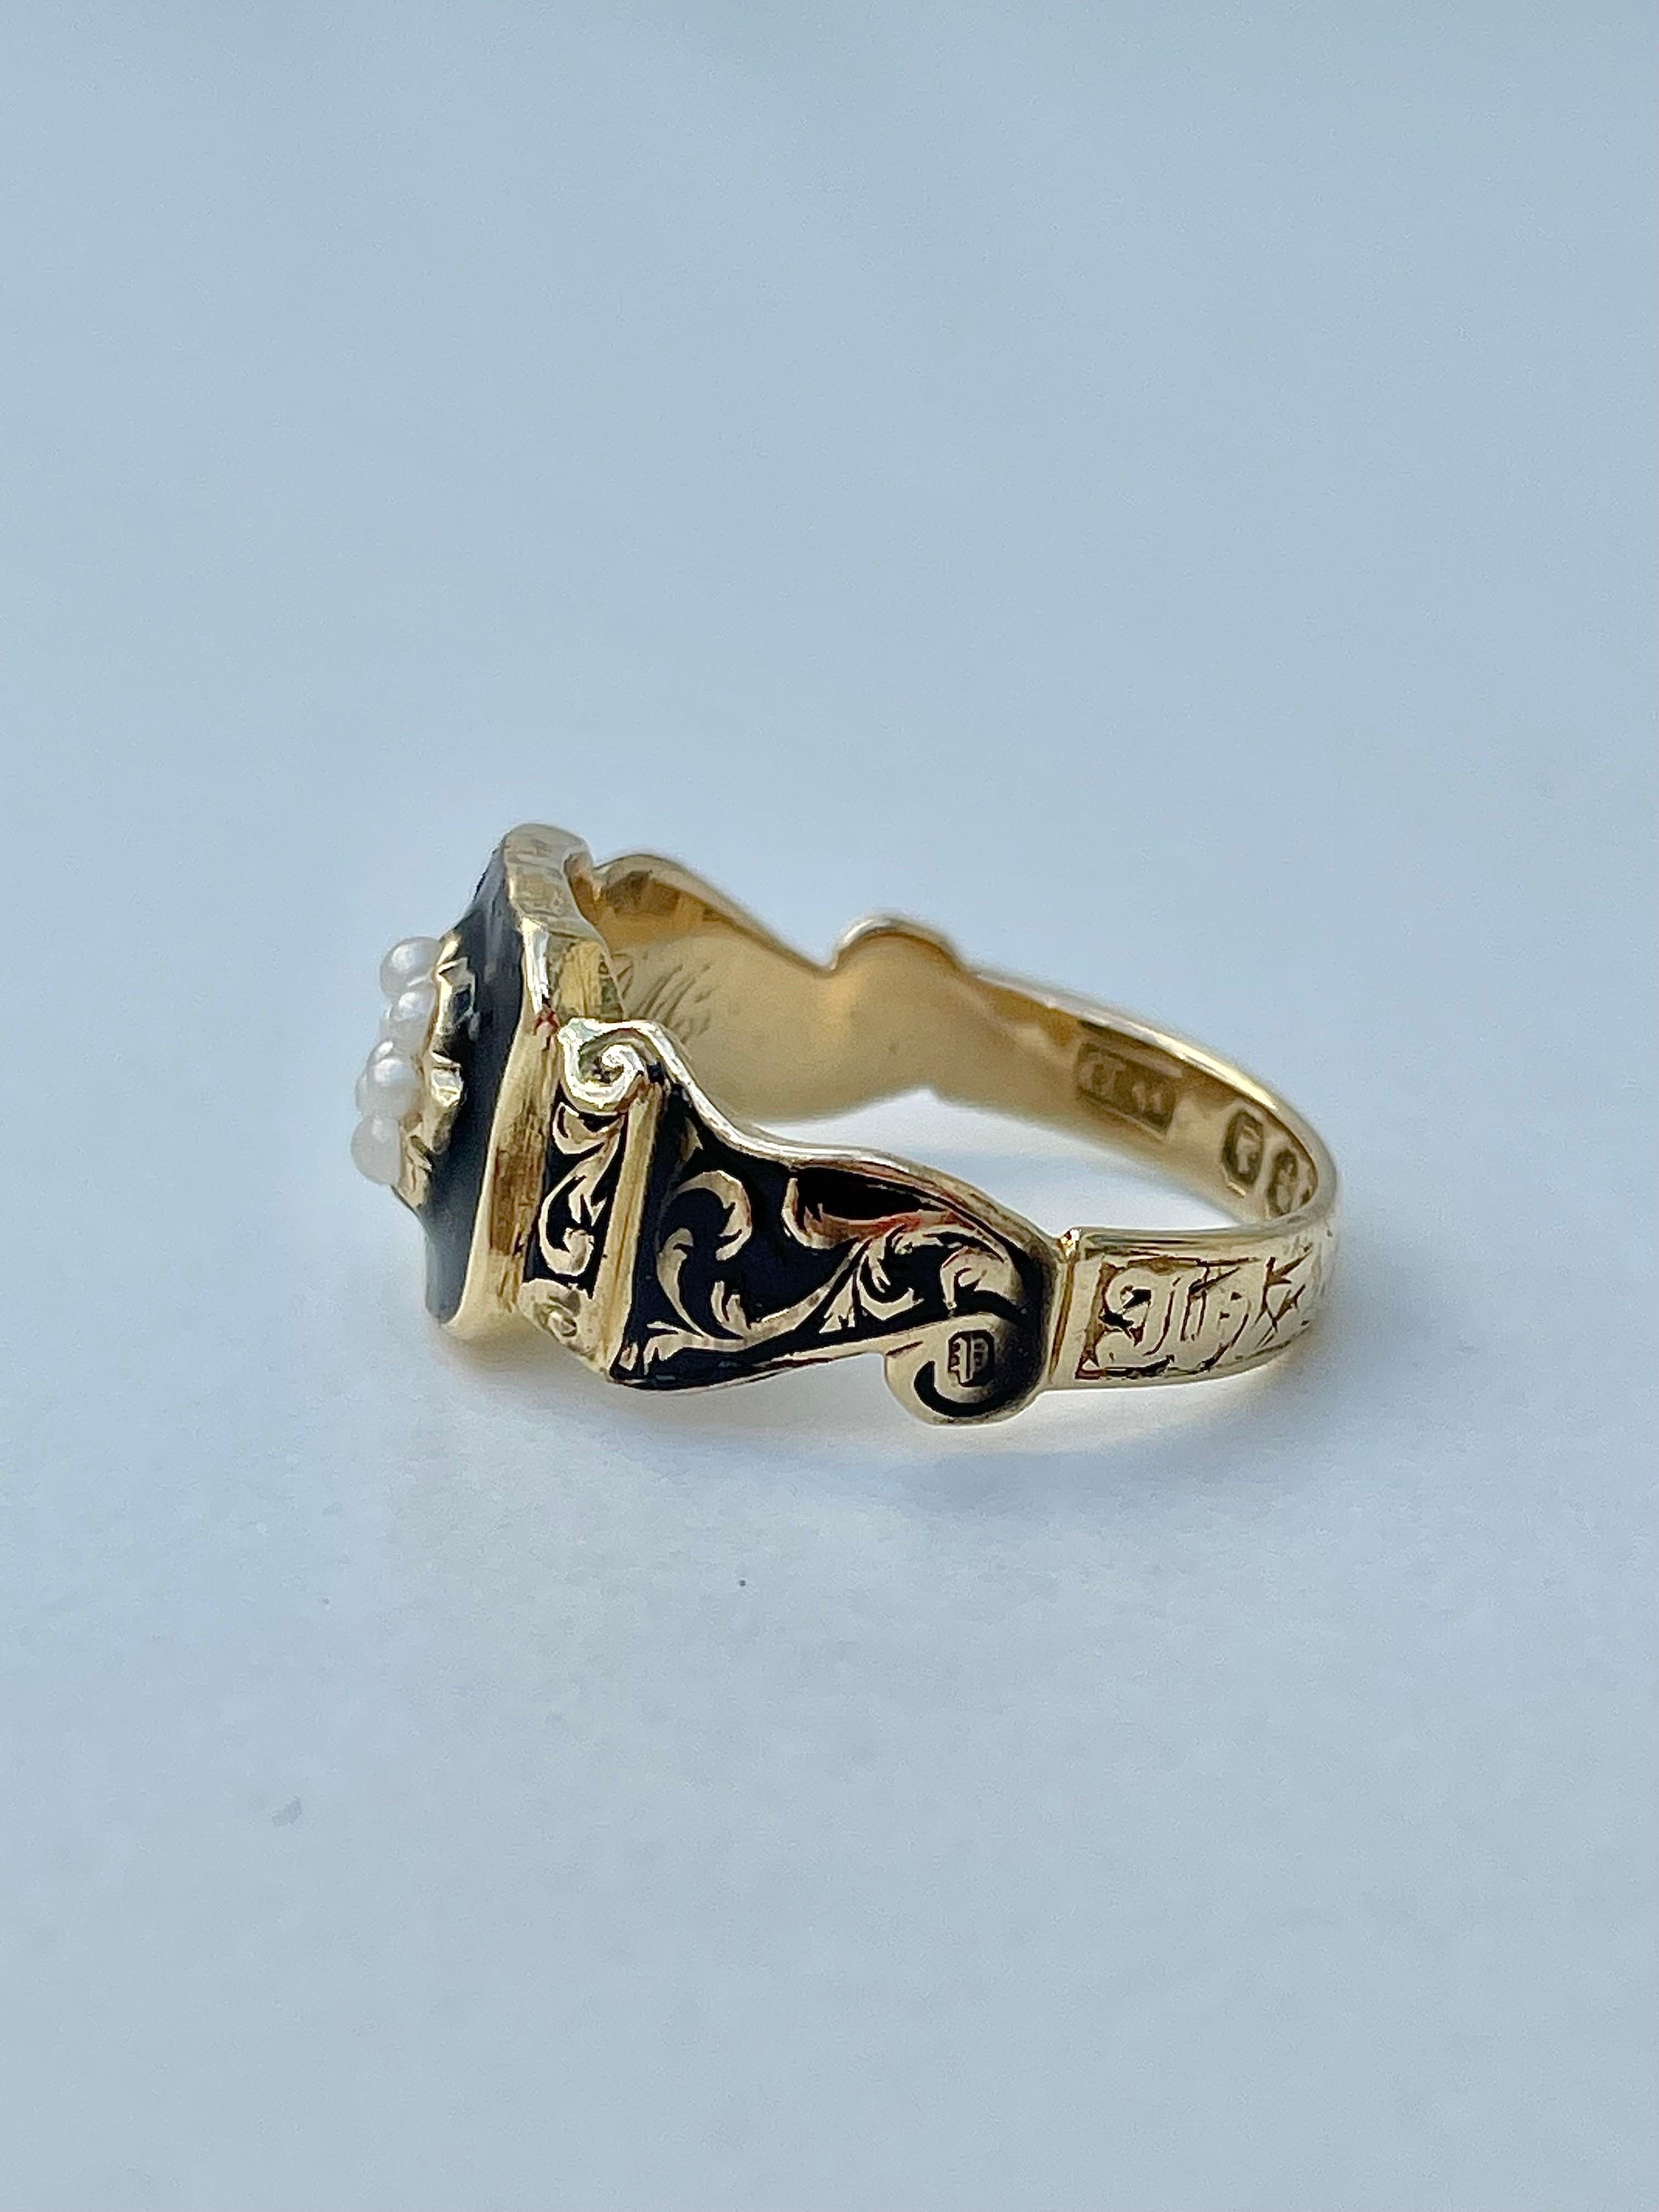 Antique Black Enamel and Pearl Mourning Ring in 18ct Yellow Gold C.1850

most charming and beautiful mourning ring

The item comes without the box in the photos but will be presented in a gift box

Measurements: weight 4.20g, size UK N1/2, head of